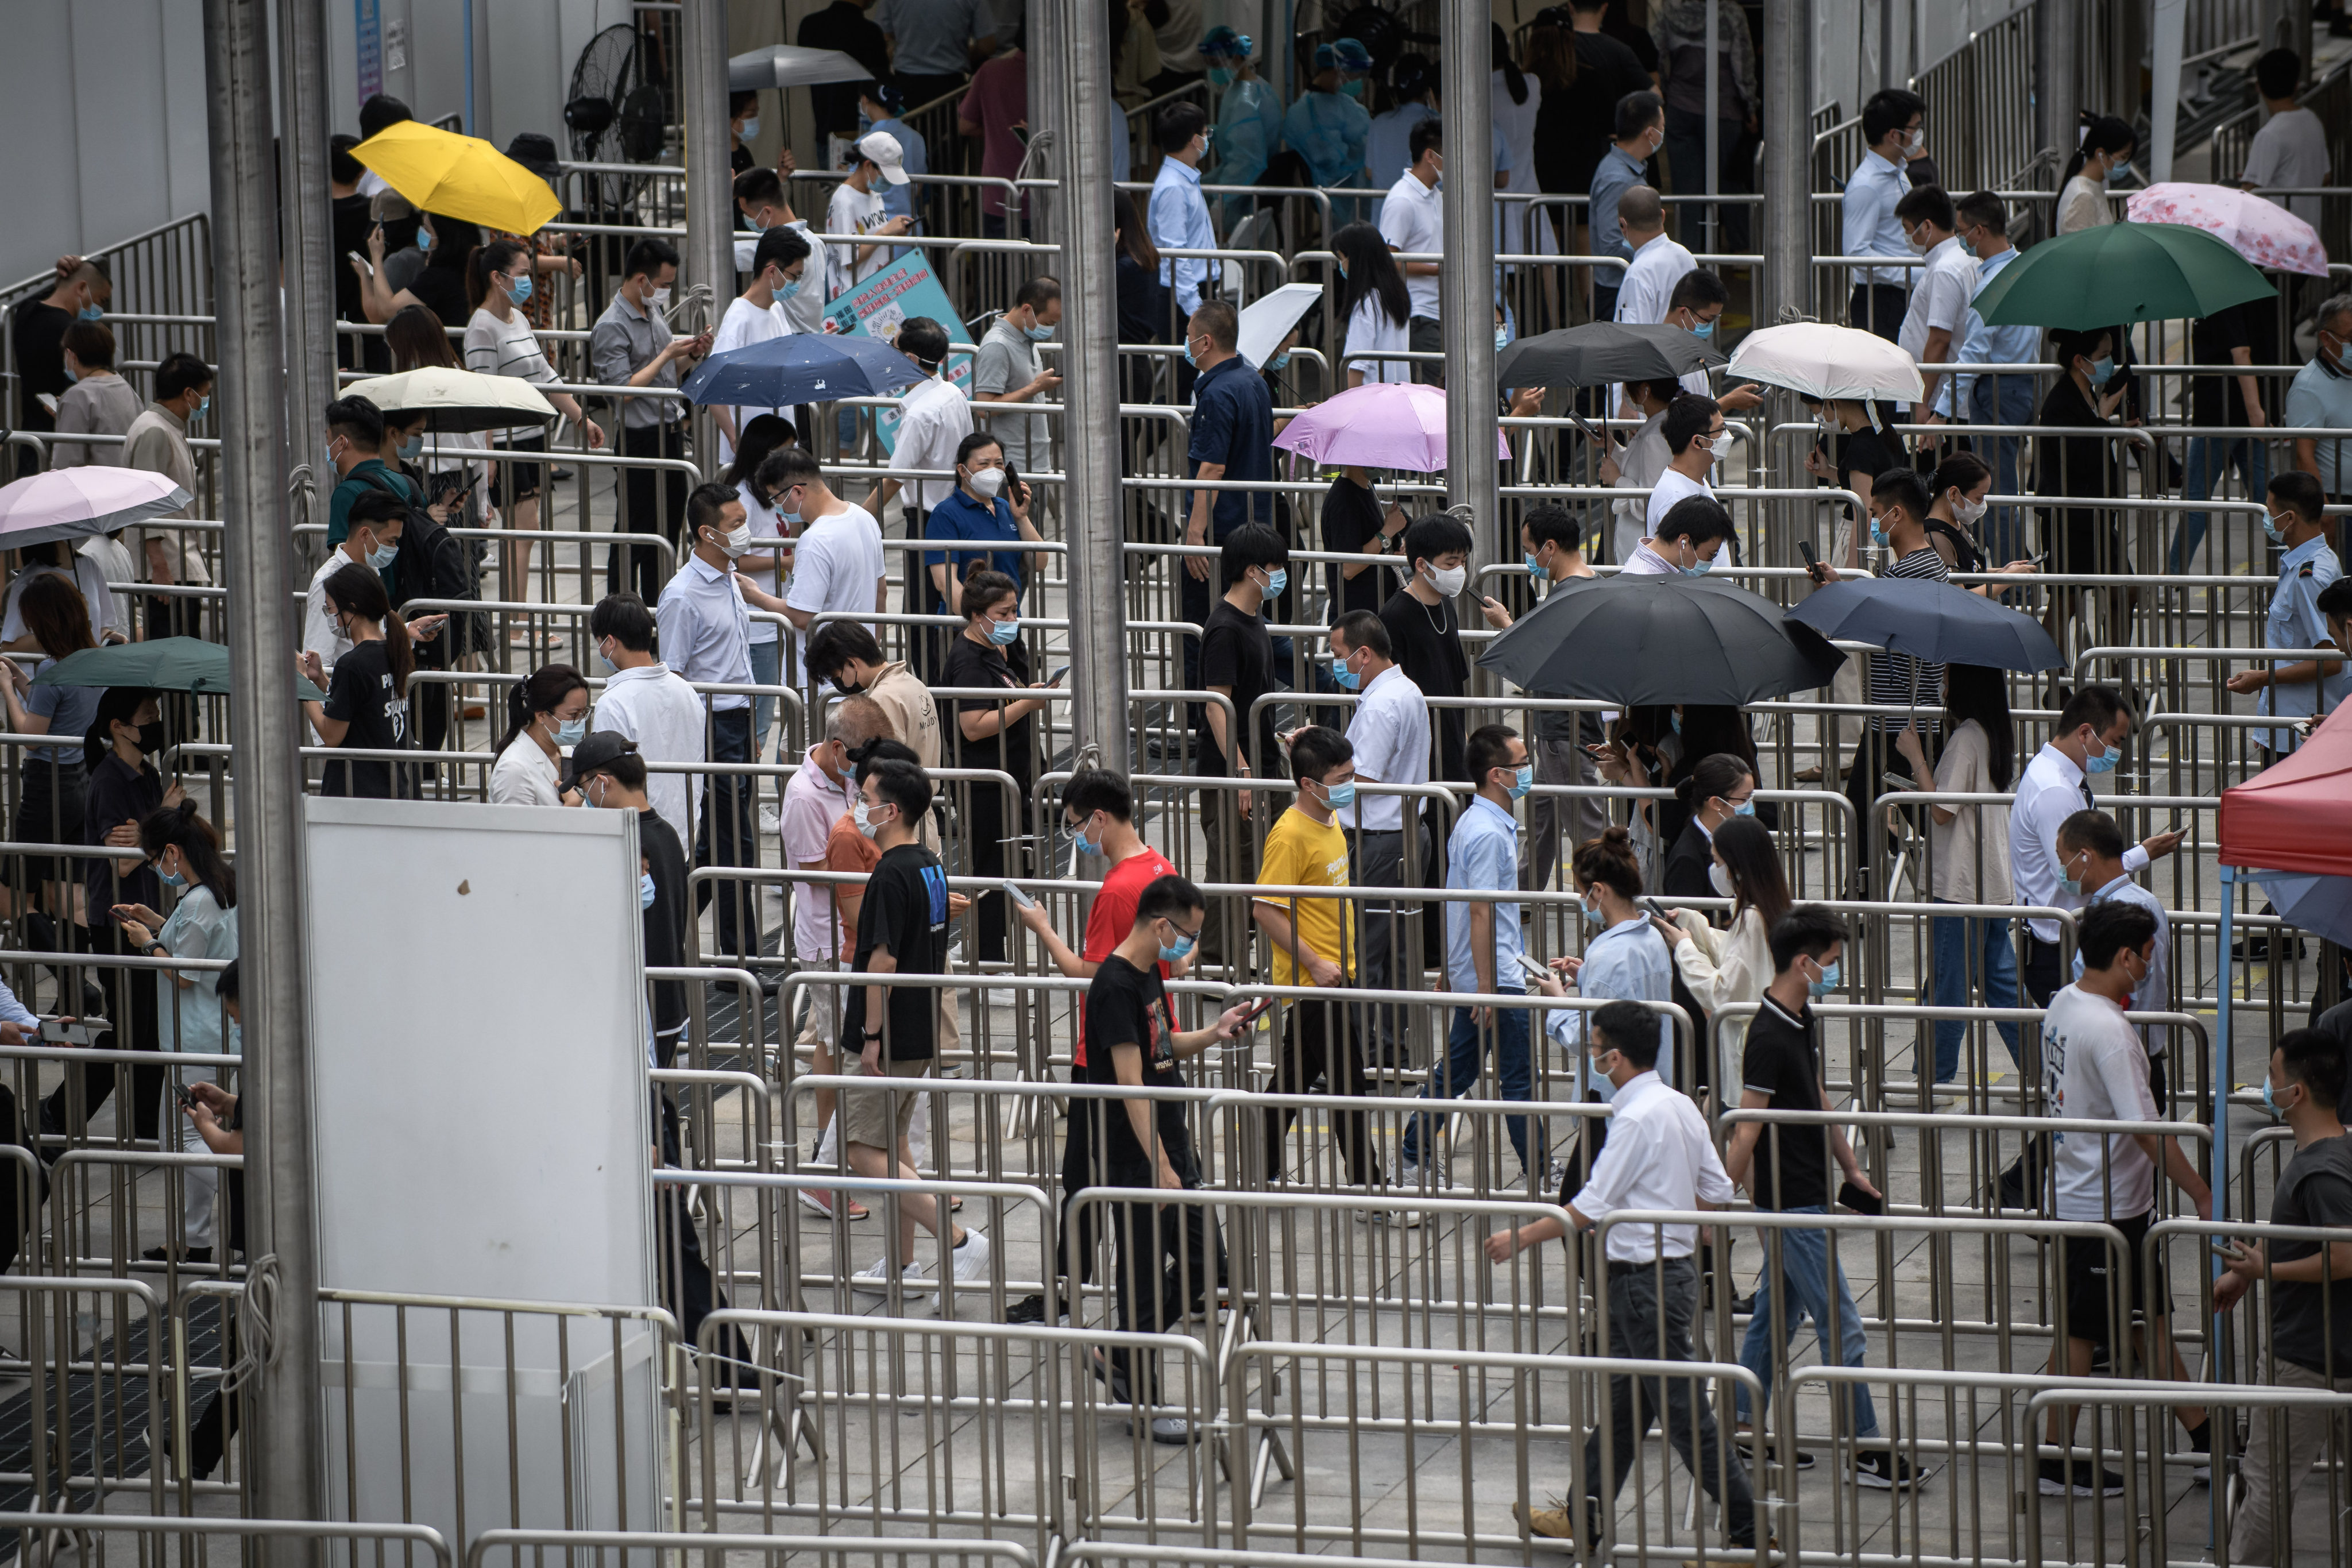 People queue for nucleic acid testing at a temporary Covid-19 testing site in Shenzhen. Photo: Anadolu Agency via Getty Images